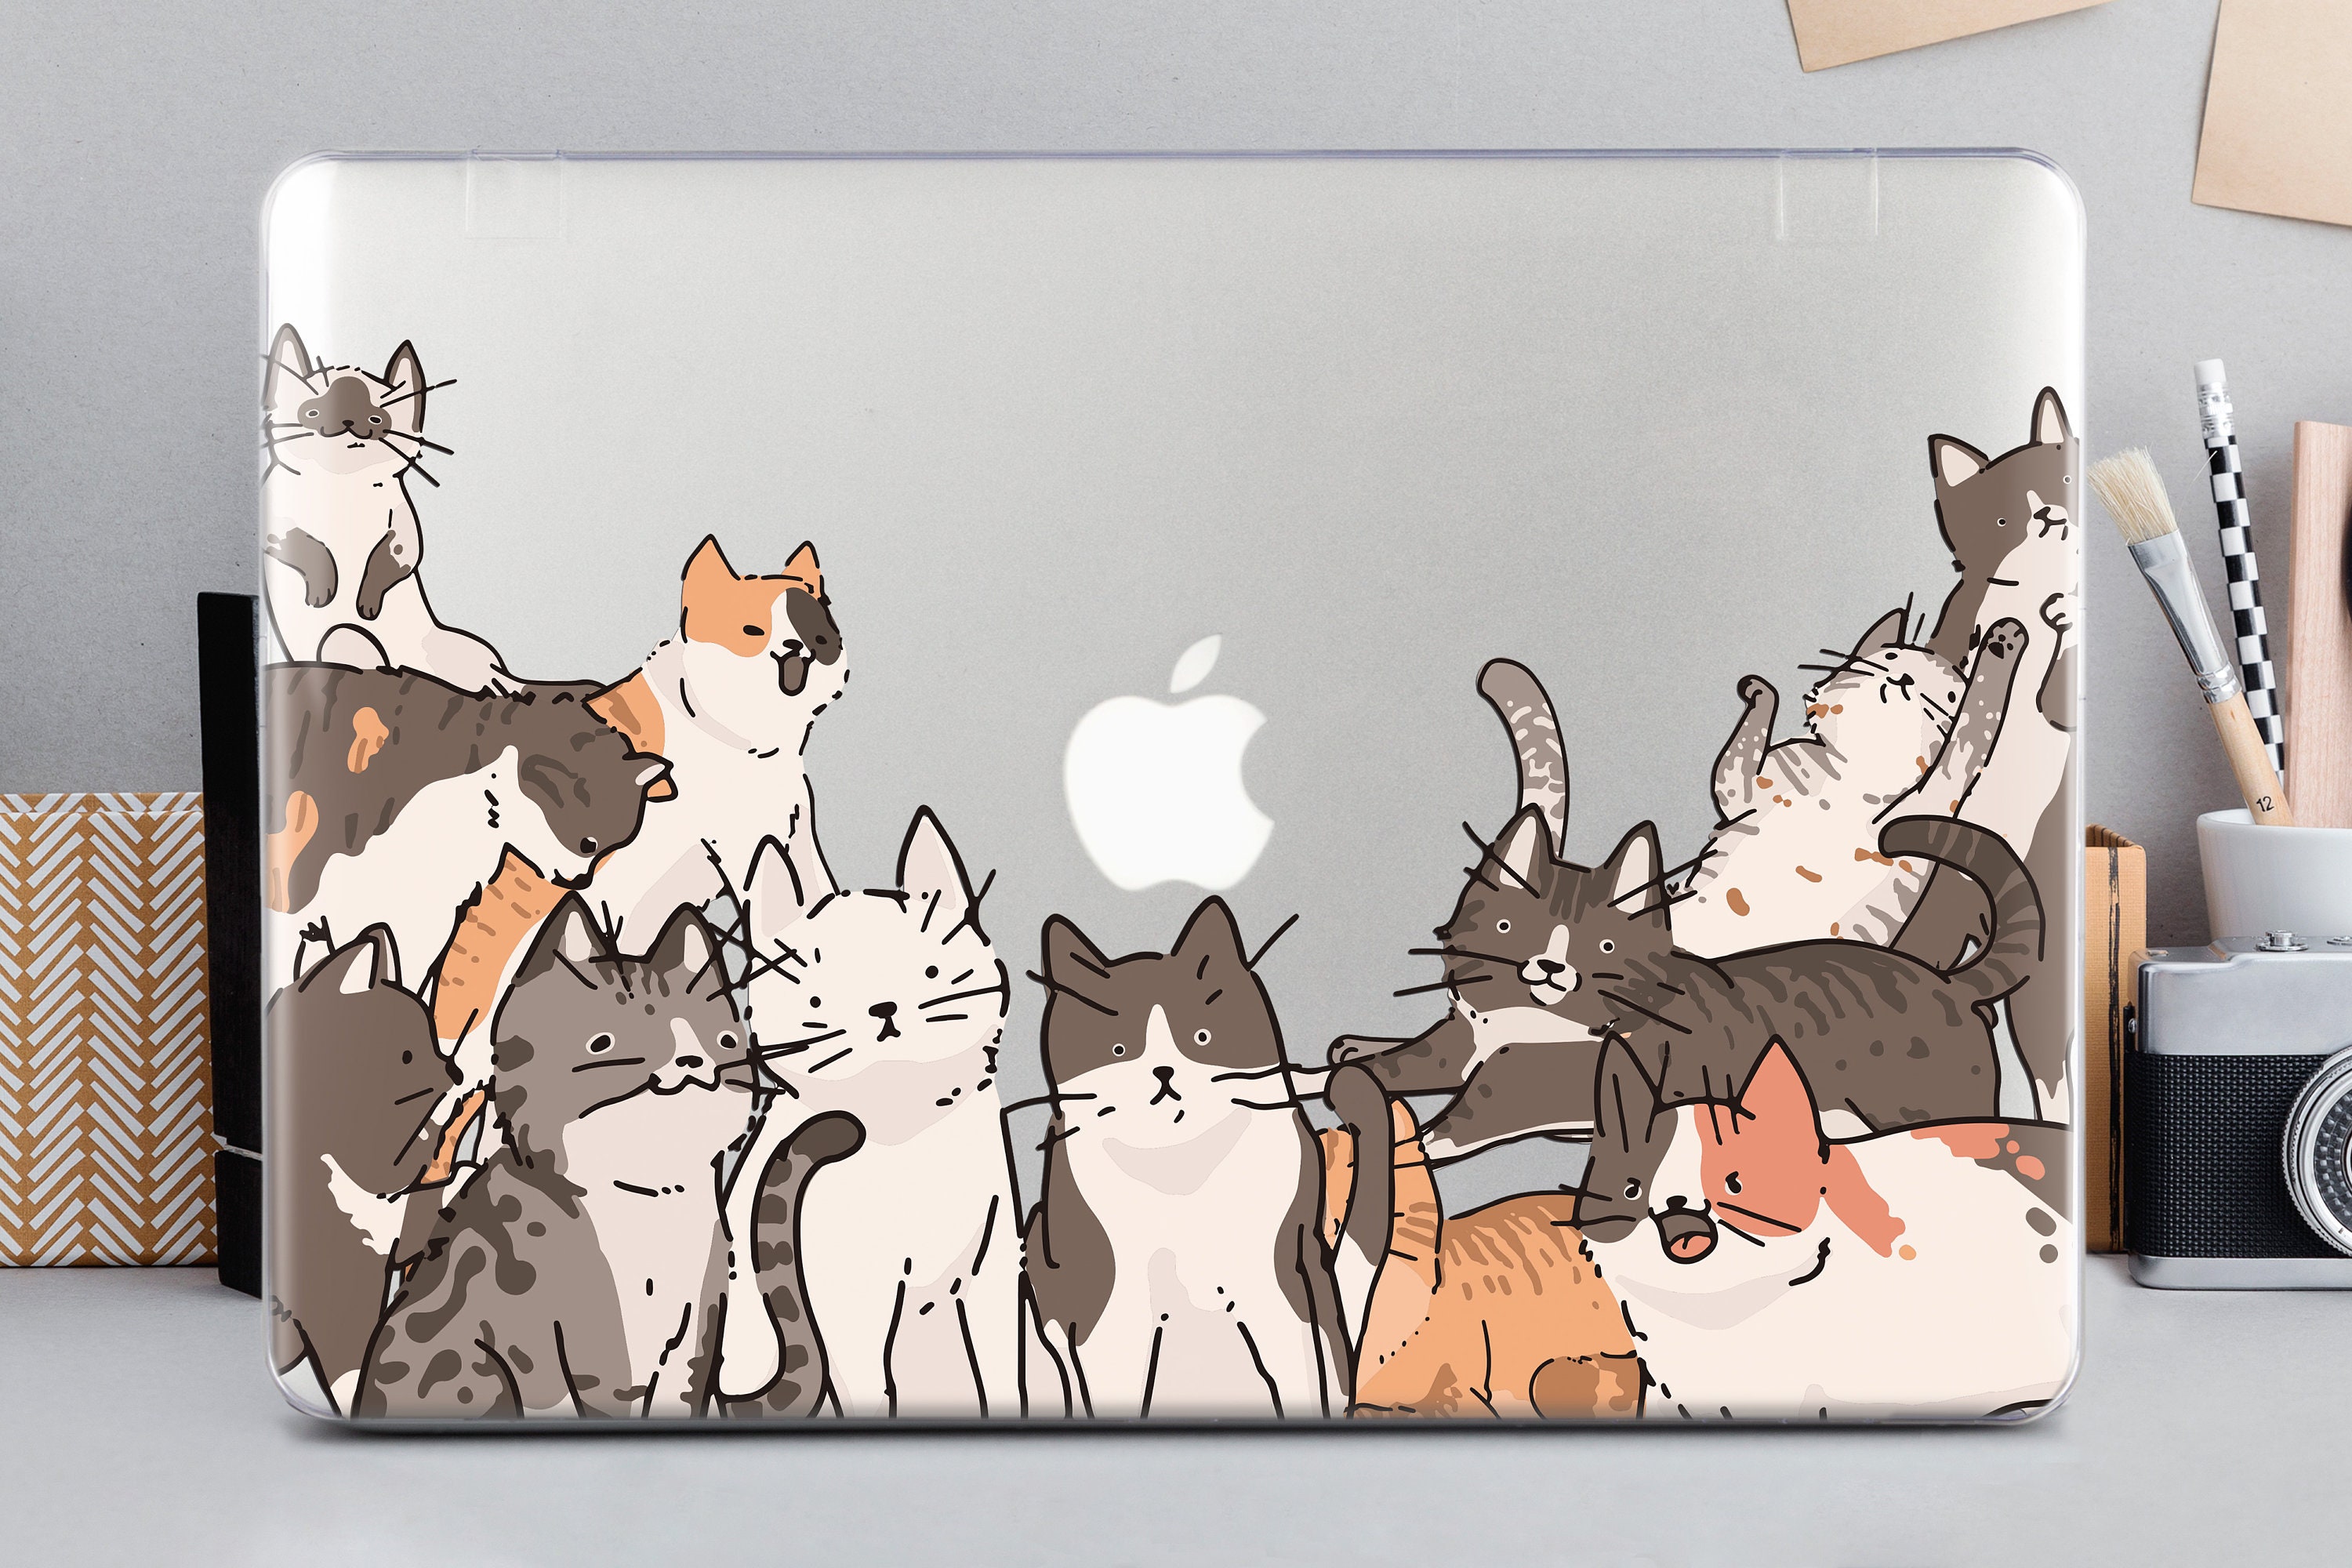 Mac Case Cartoon Cat with Red Gifts Box Plastic Hard Shell Compatible Mac Air 11 Pro 13 15 Laptop Case Protection for MacBook 2016-2019 Version